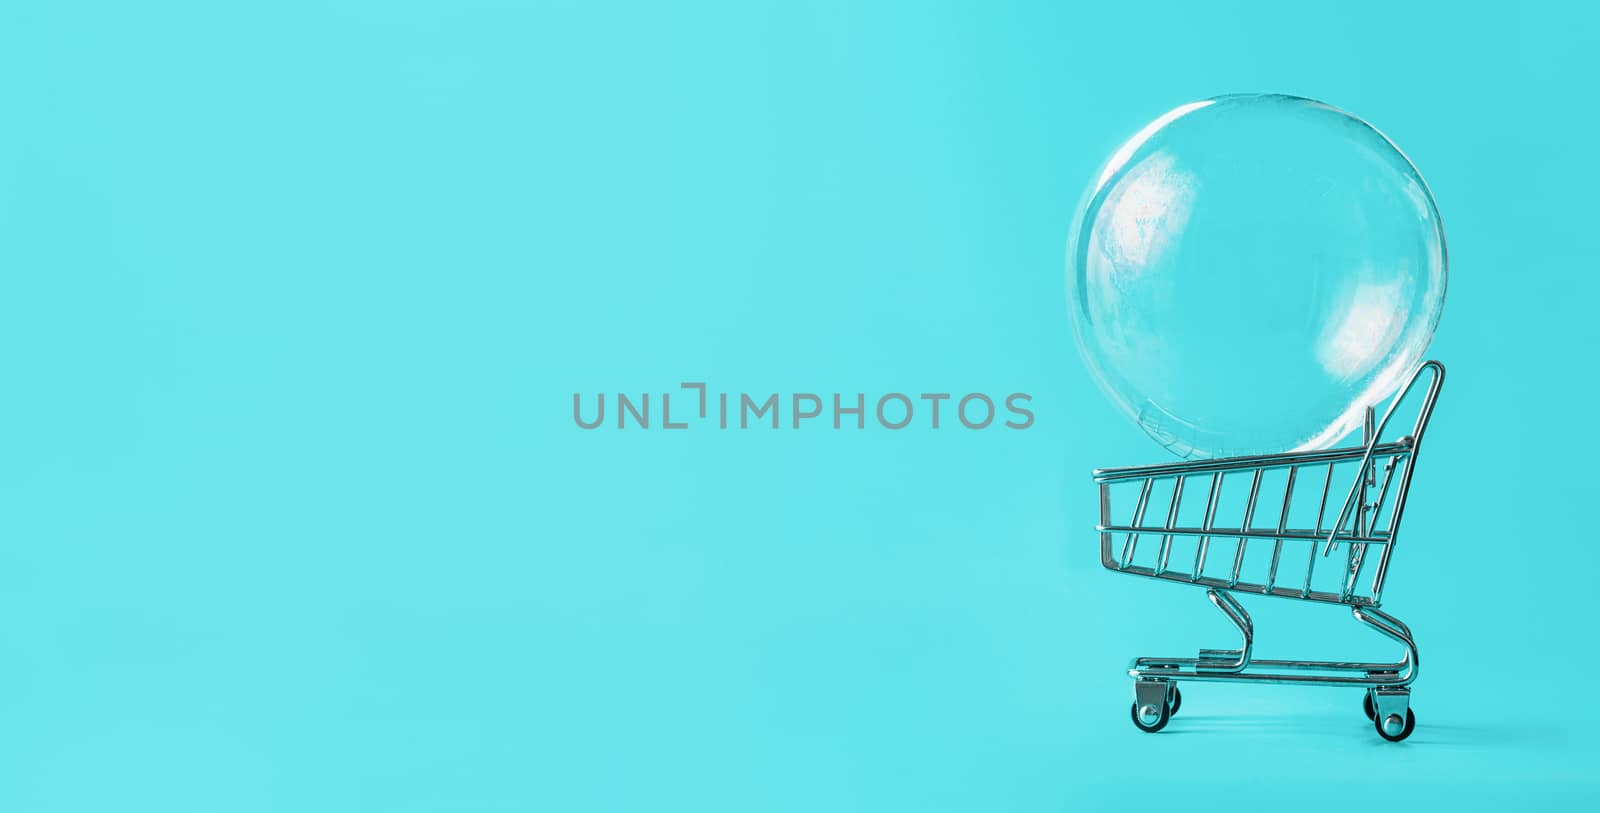 Shopping cart with soap bubble on bright blue background. Ephemeral happiness from shopping, shopaholism, consumerism concept. Shopping concept, minimalist creative layout, copy space for text. Banner